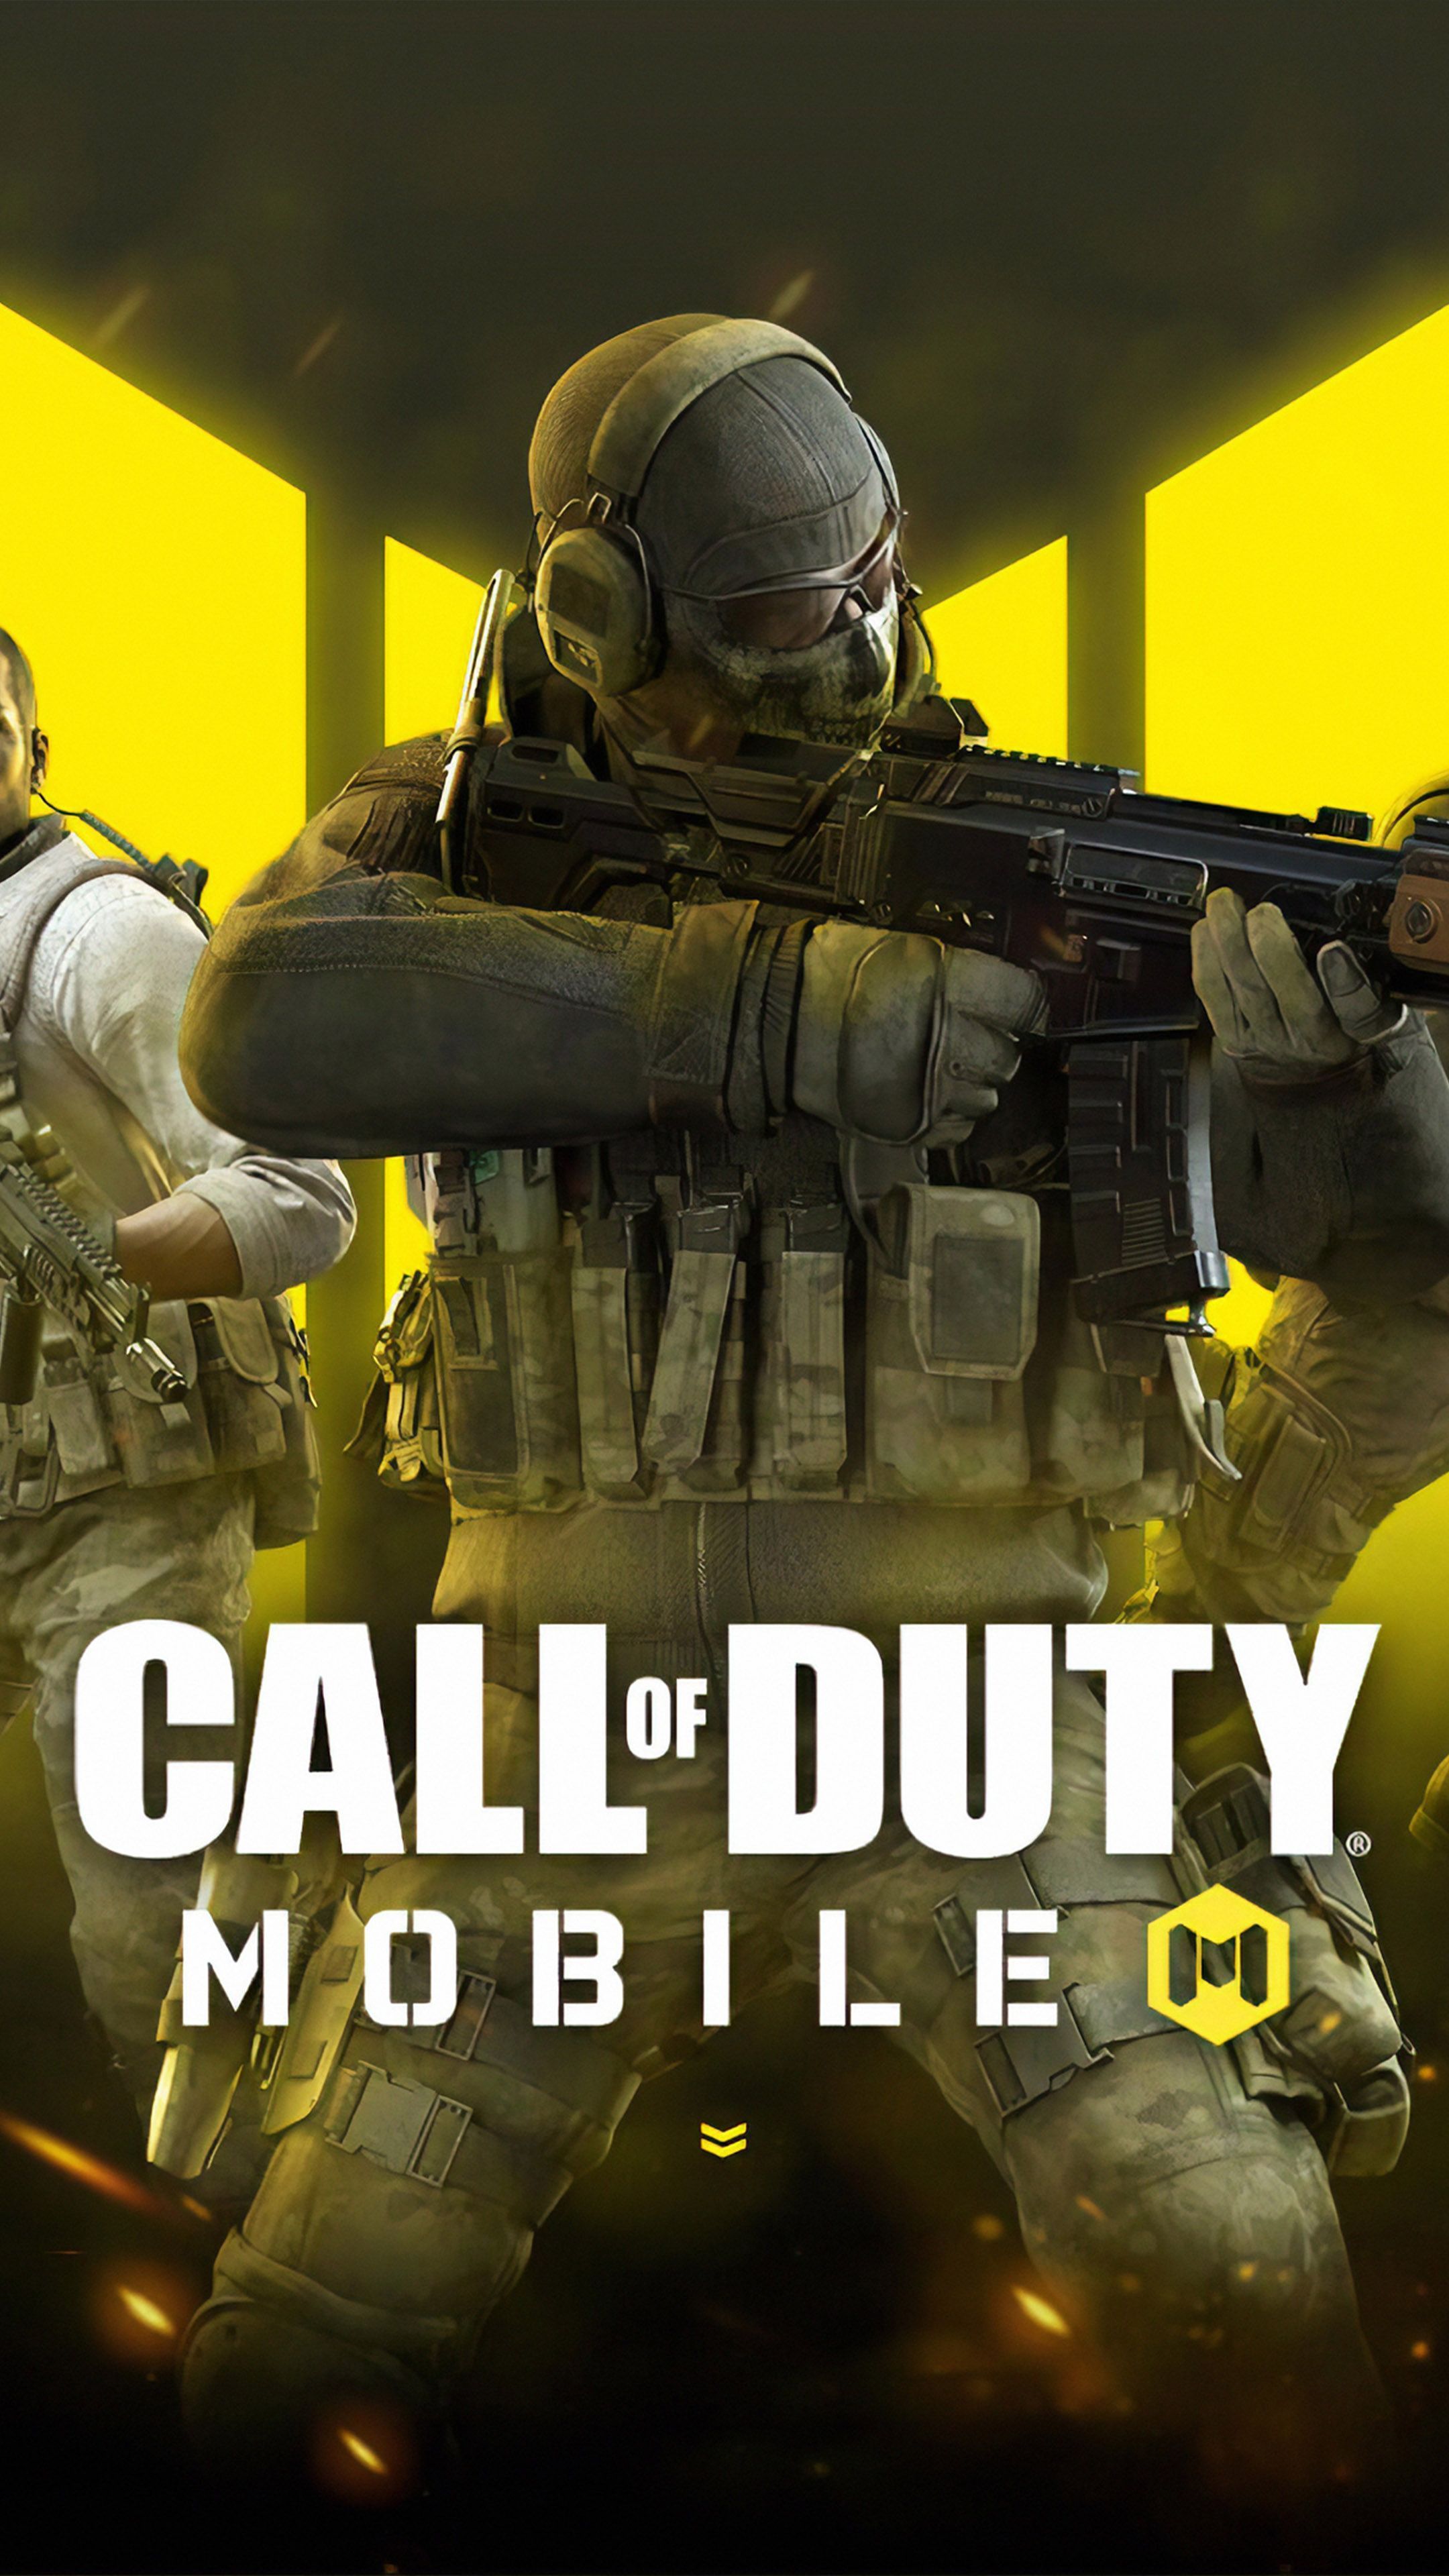 Call of Duty Mobile 2019 4K. Call of duty, Samsung